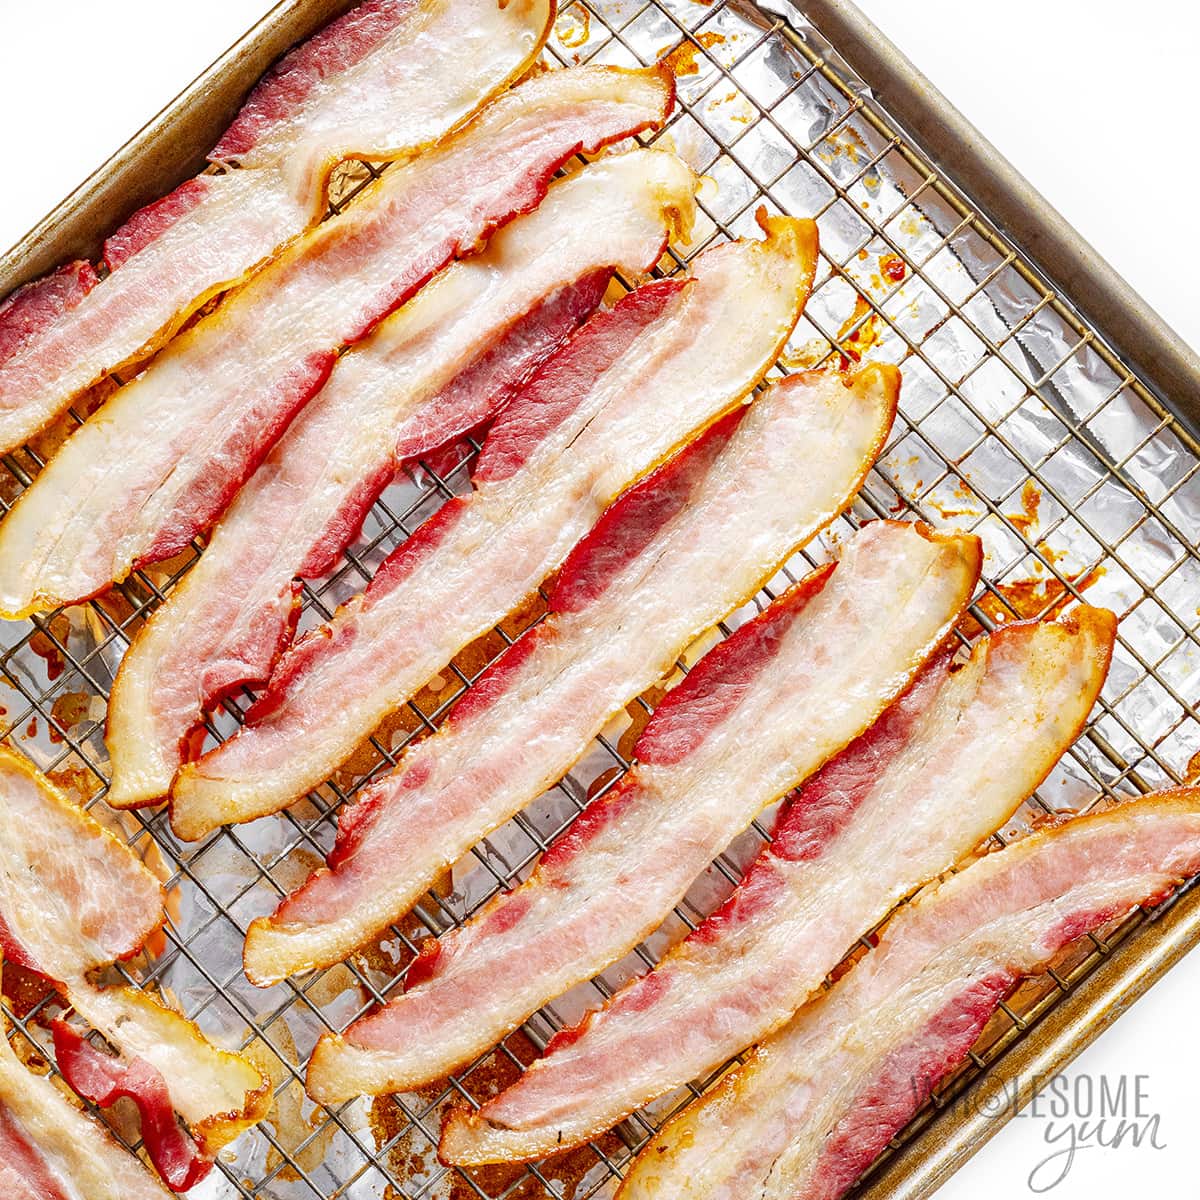 Bacon on a baking sheet with a rack.